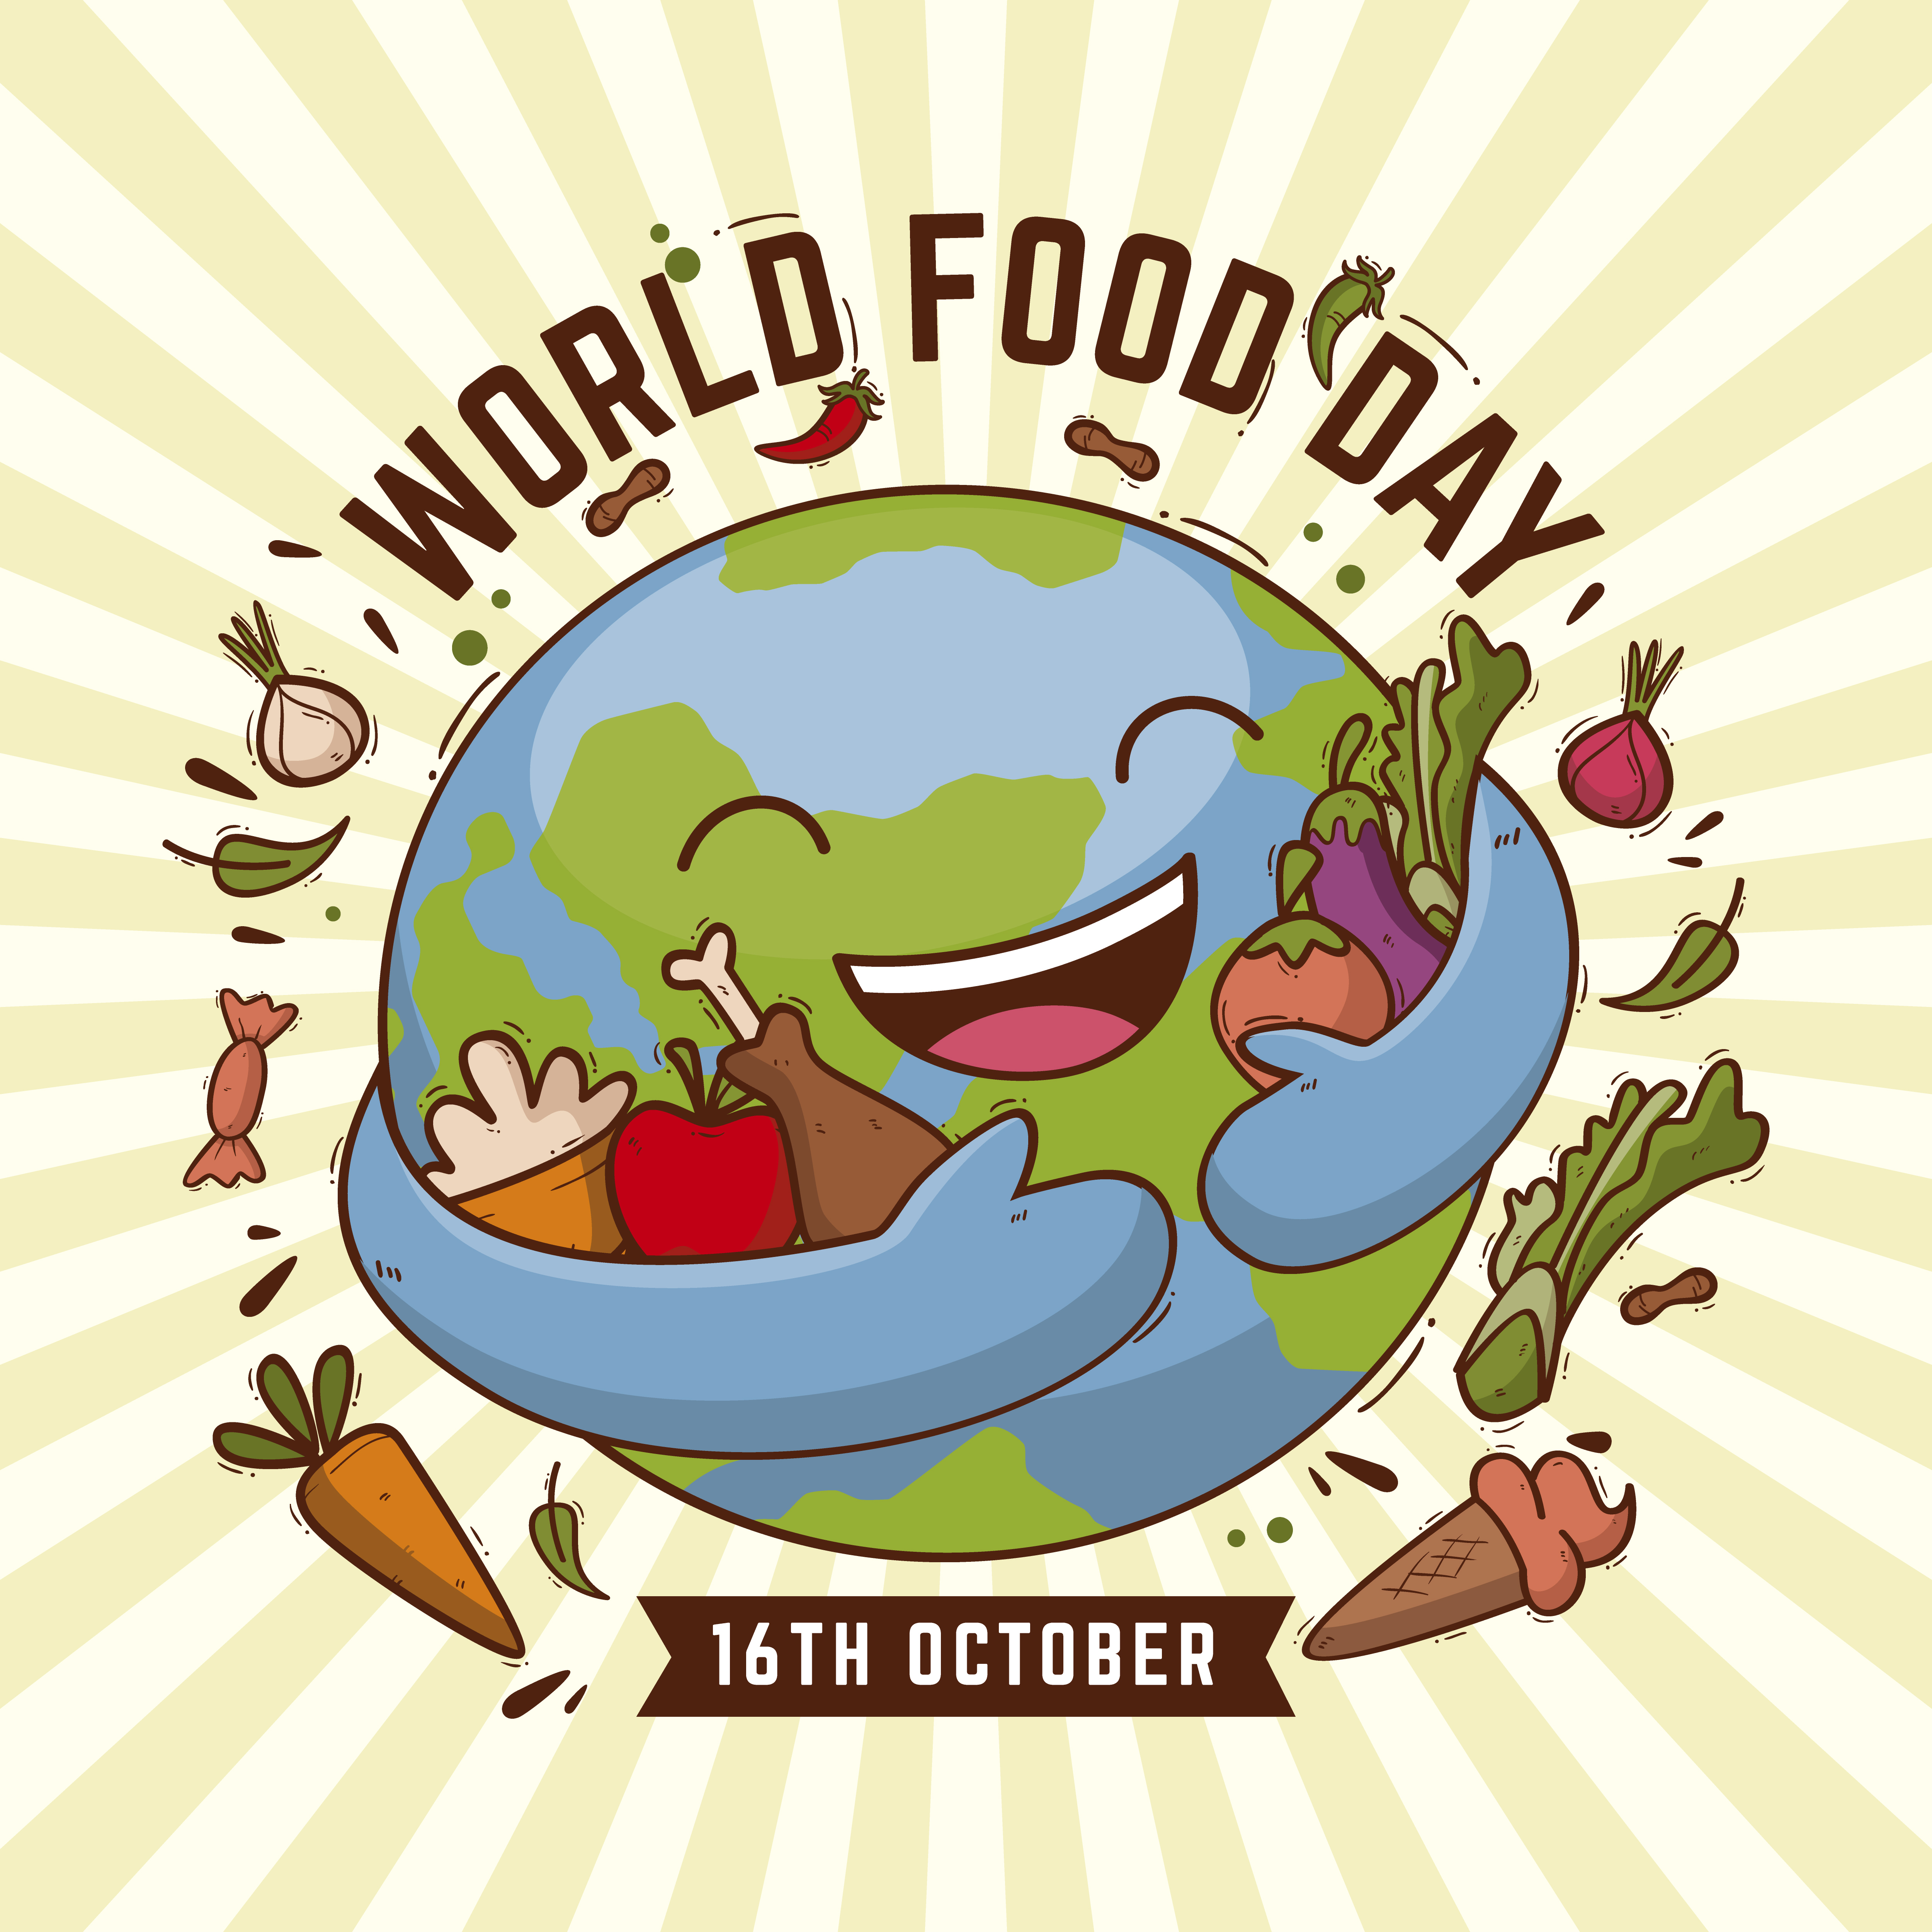 world food day campaign